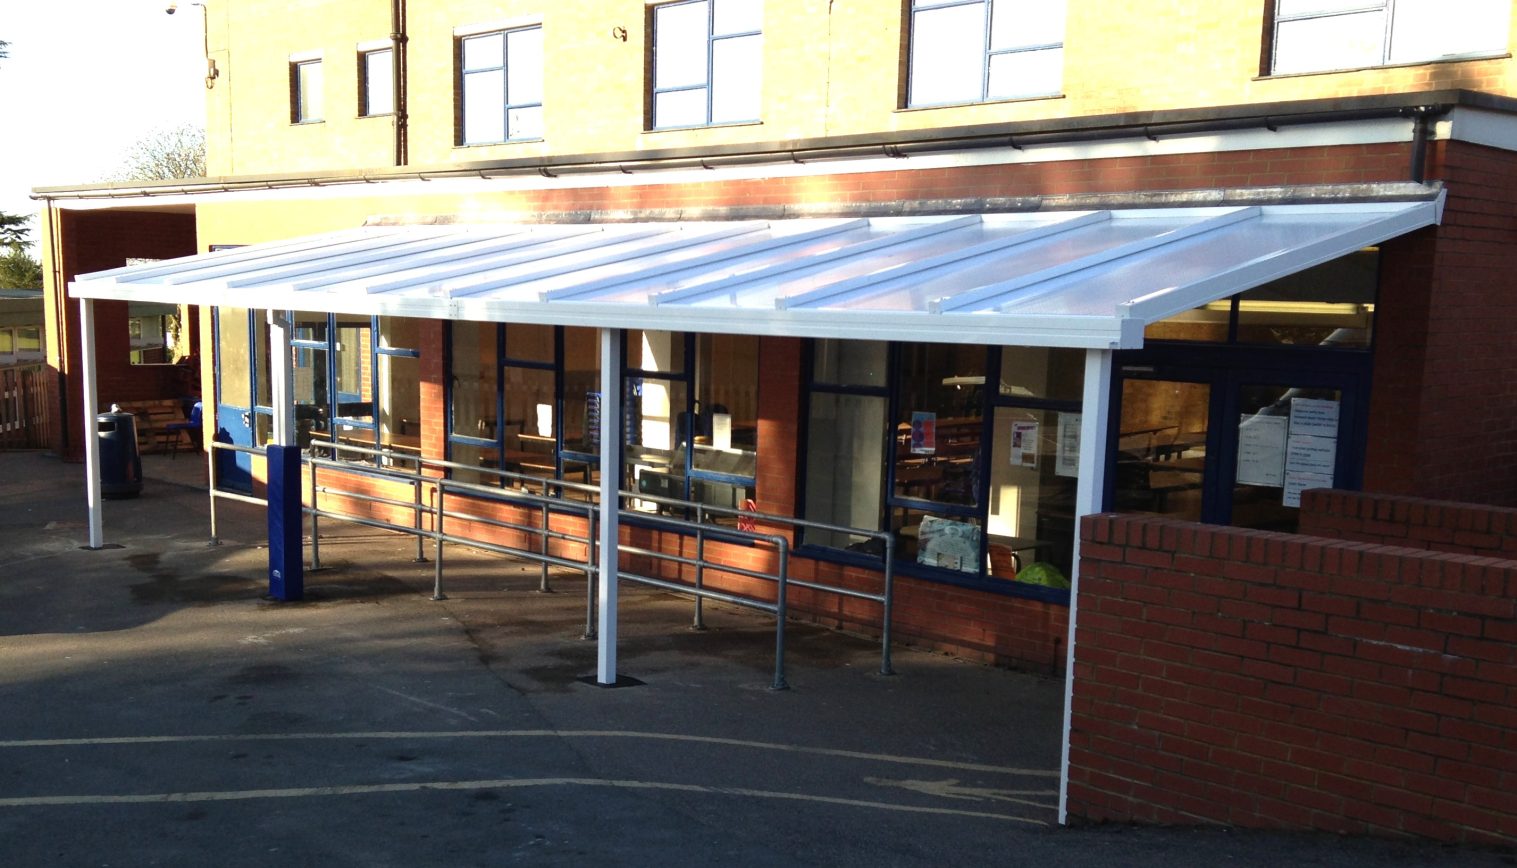 Immanuel College – Wall Mounted Canopy